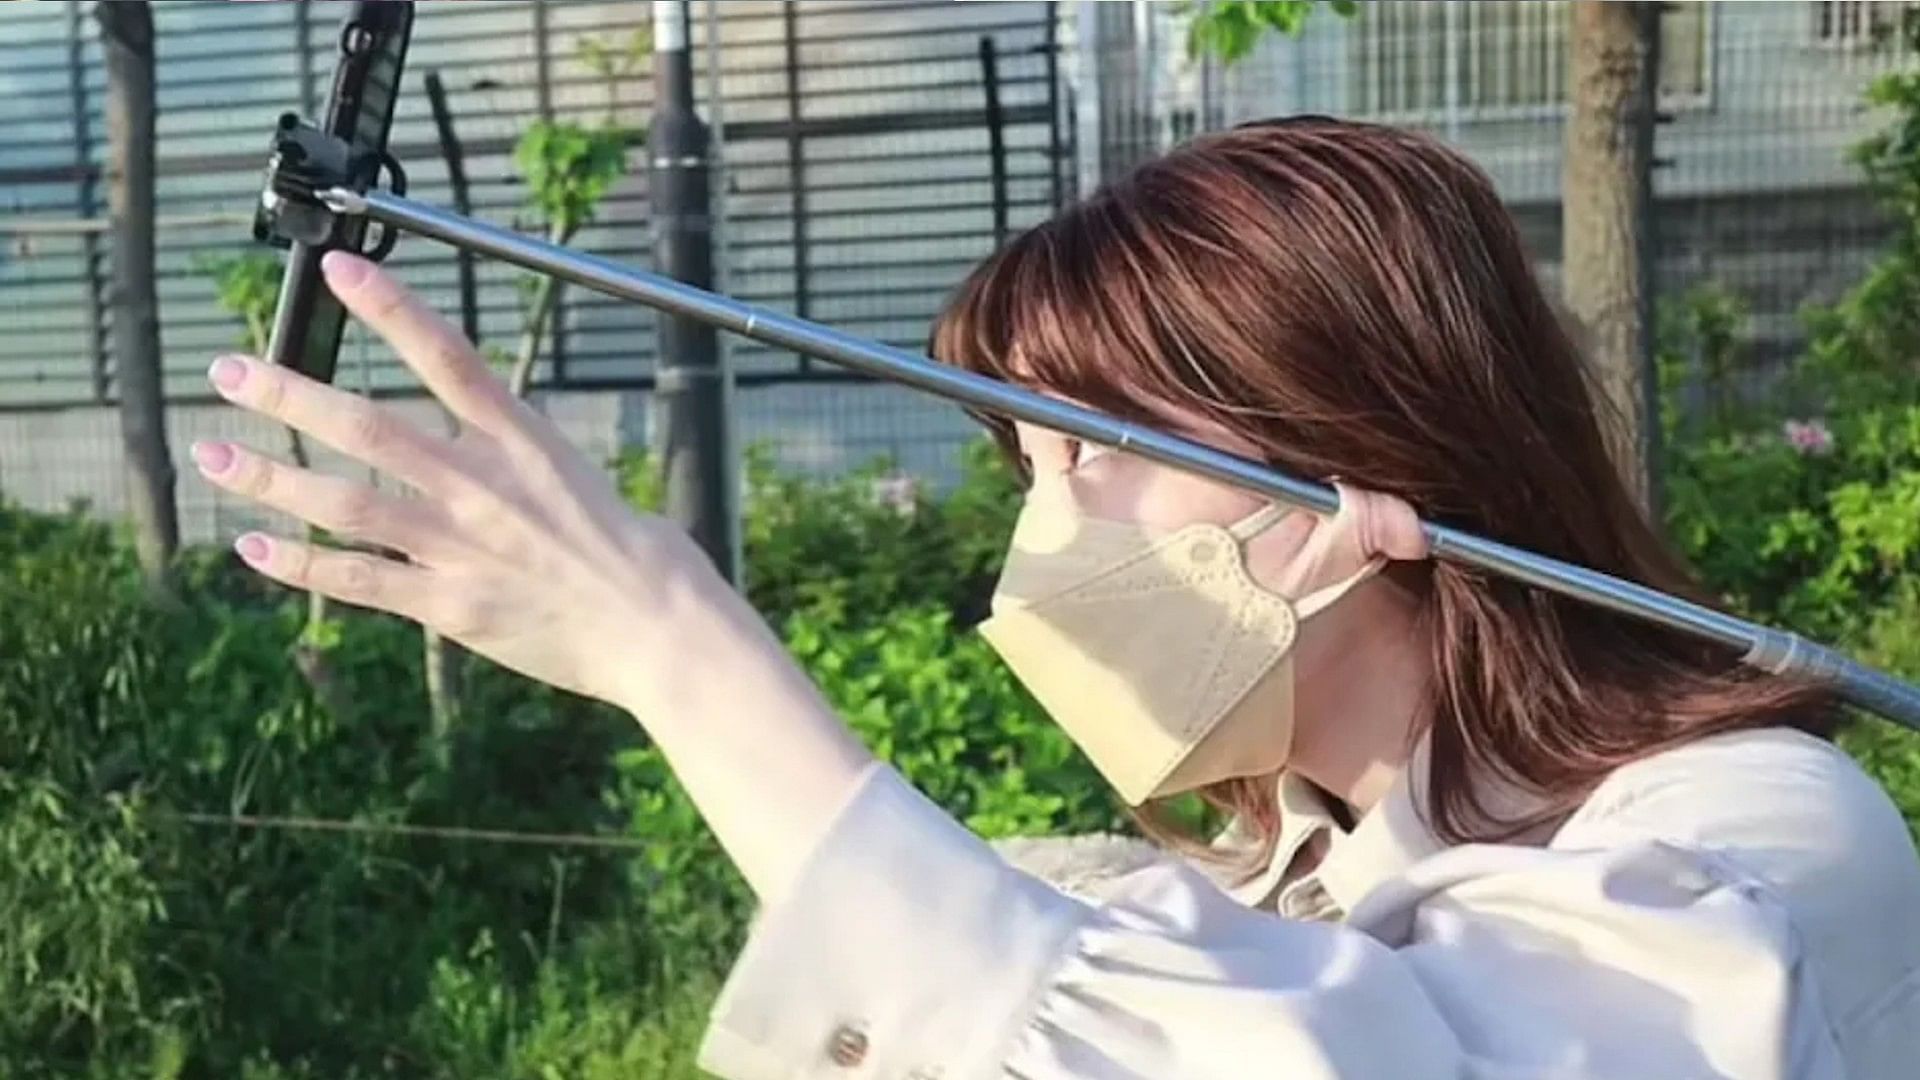 Real Life Elastigirl video this woman can Hold Umbrella Selfie Sticks with Stretchy Earlobes